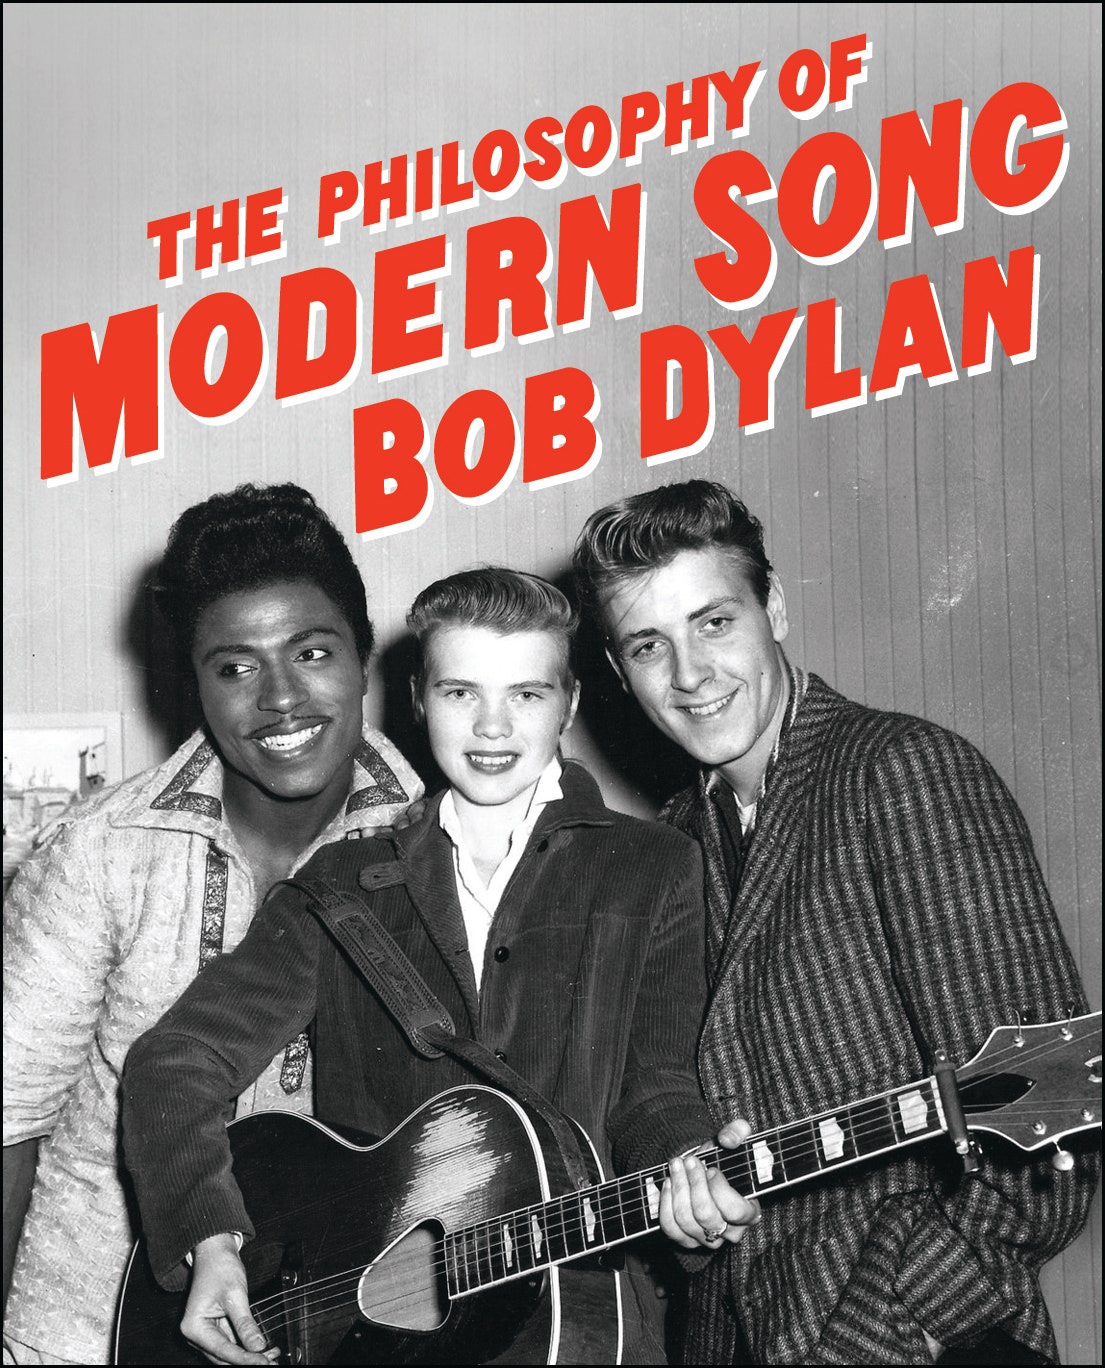 Bob Dylan Announces New Book The Philosophy of Modern Song.